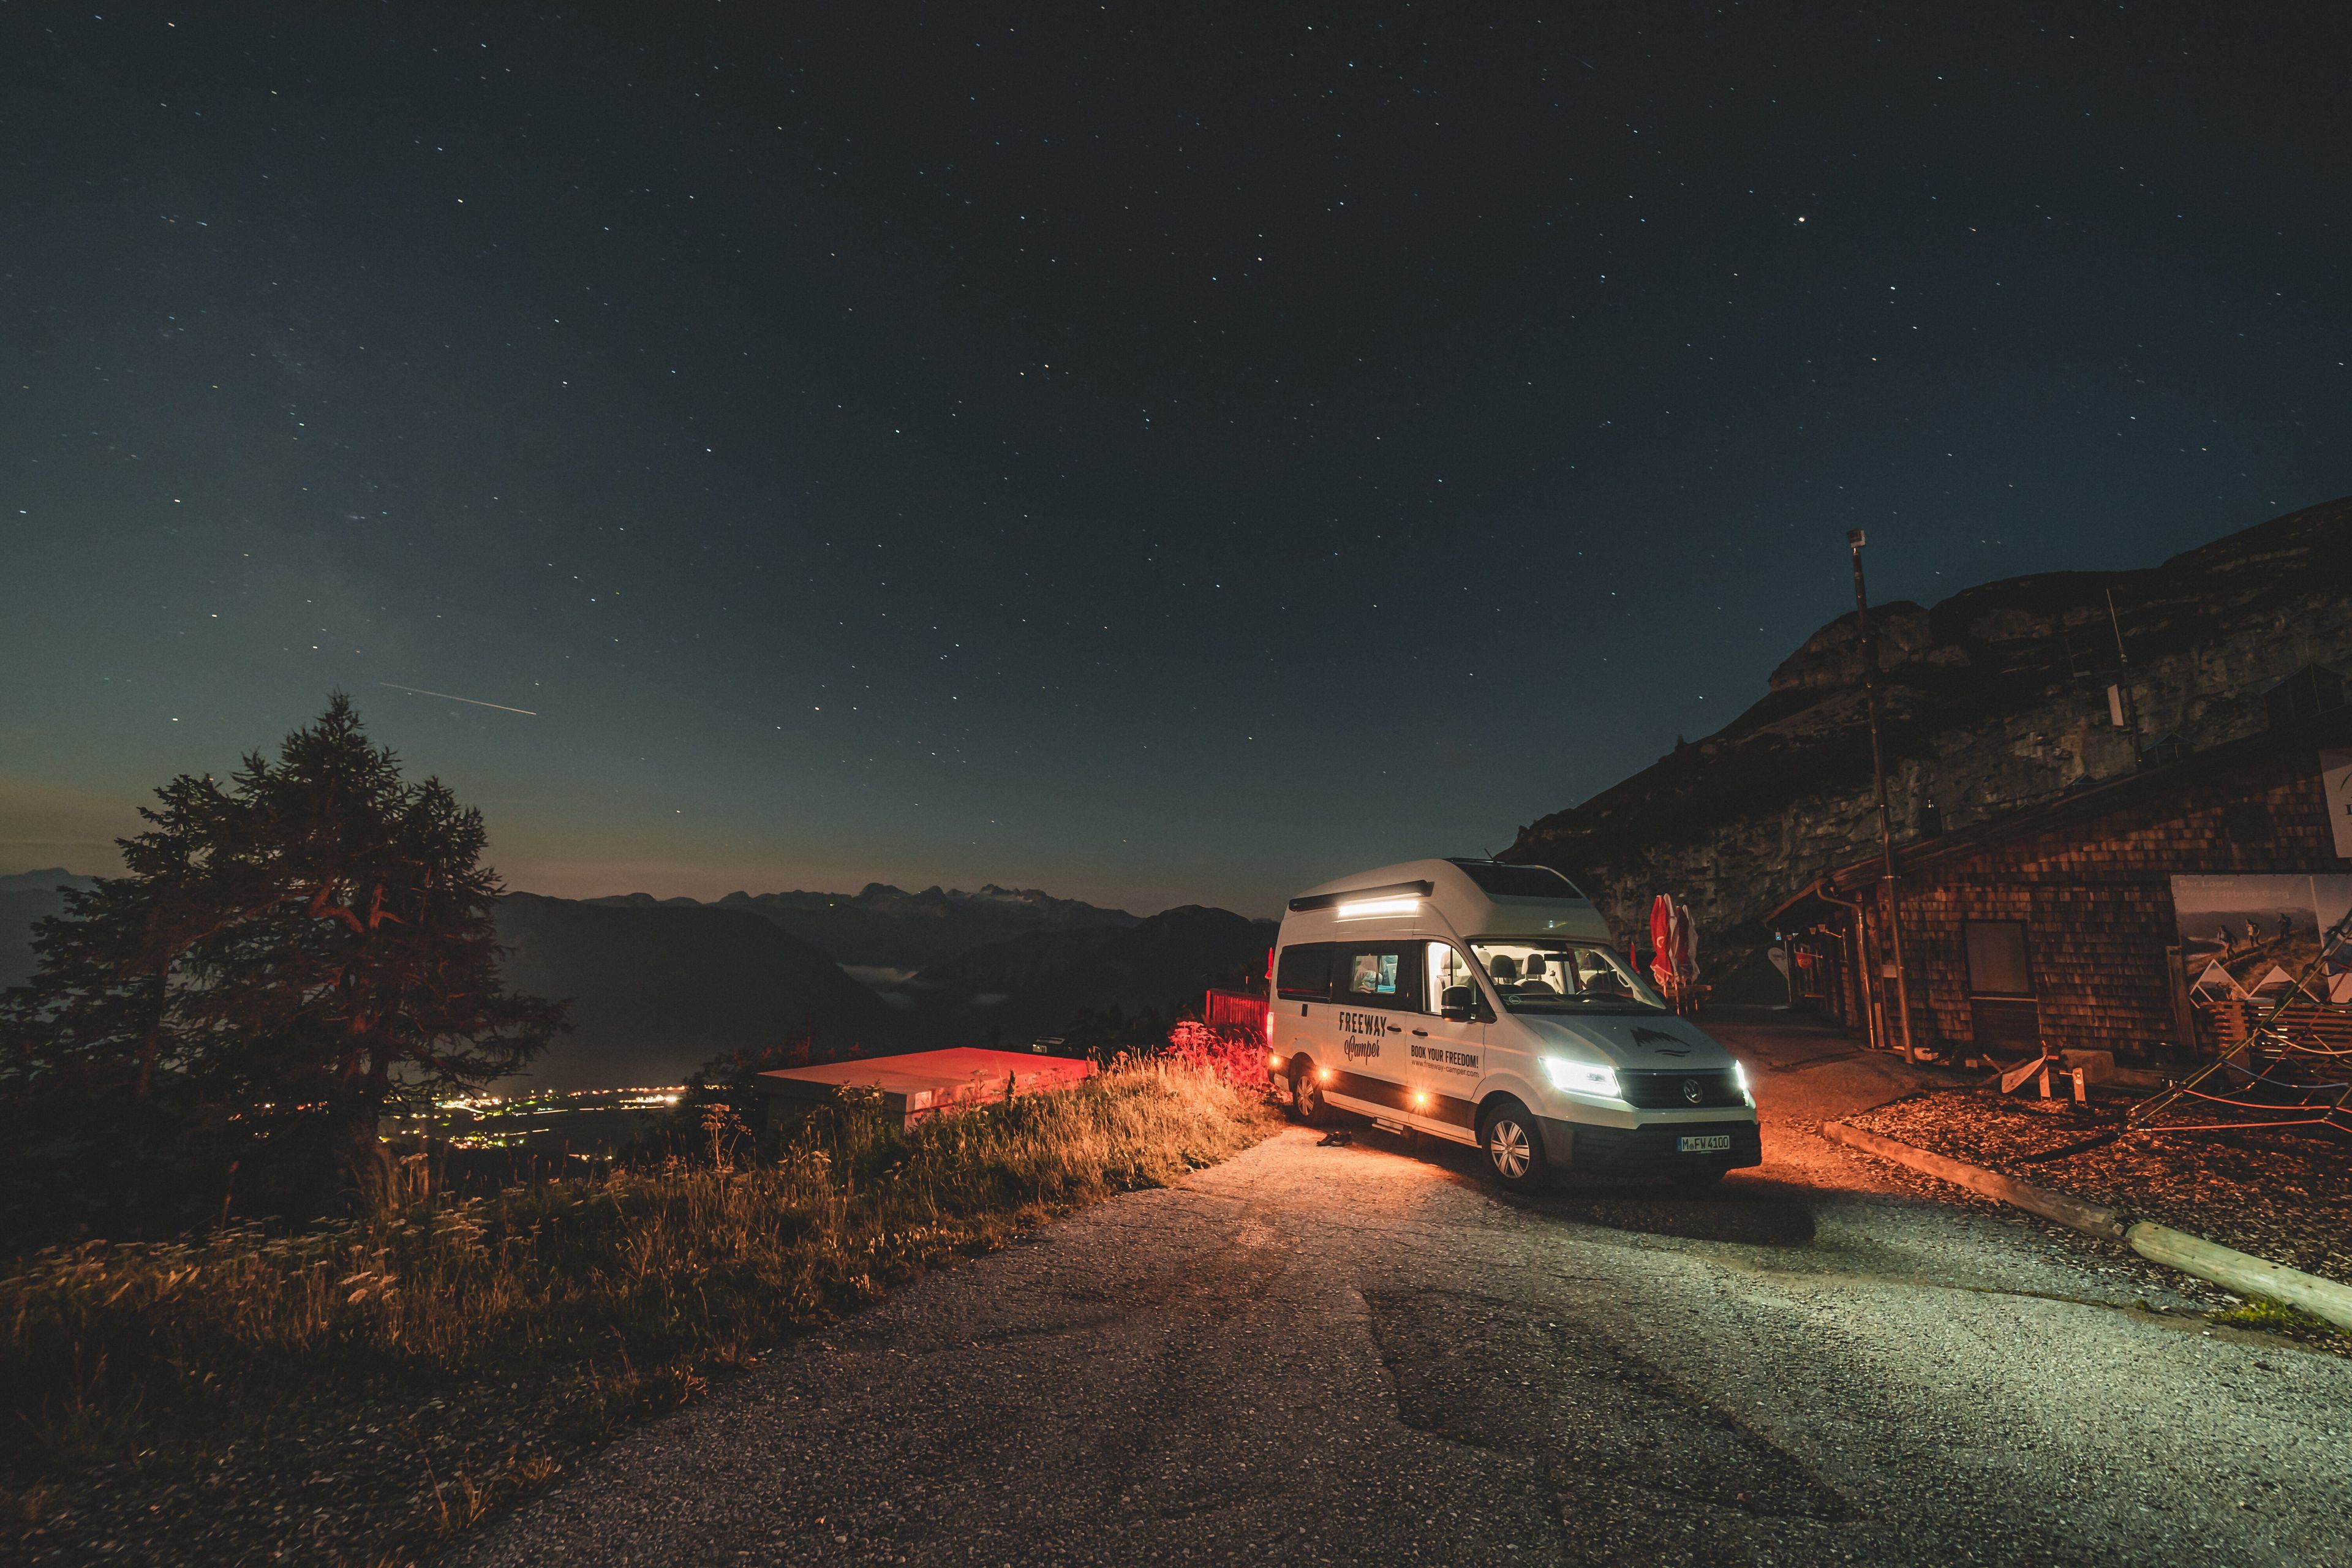 FWC Campervan stands on a nocturnal road in the mountains in front of a starry sky.